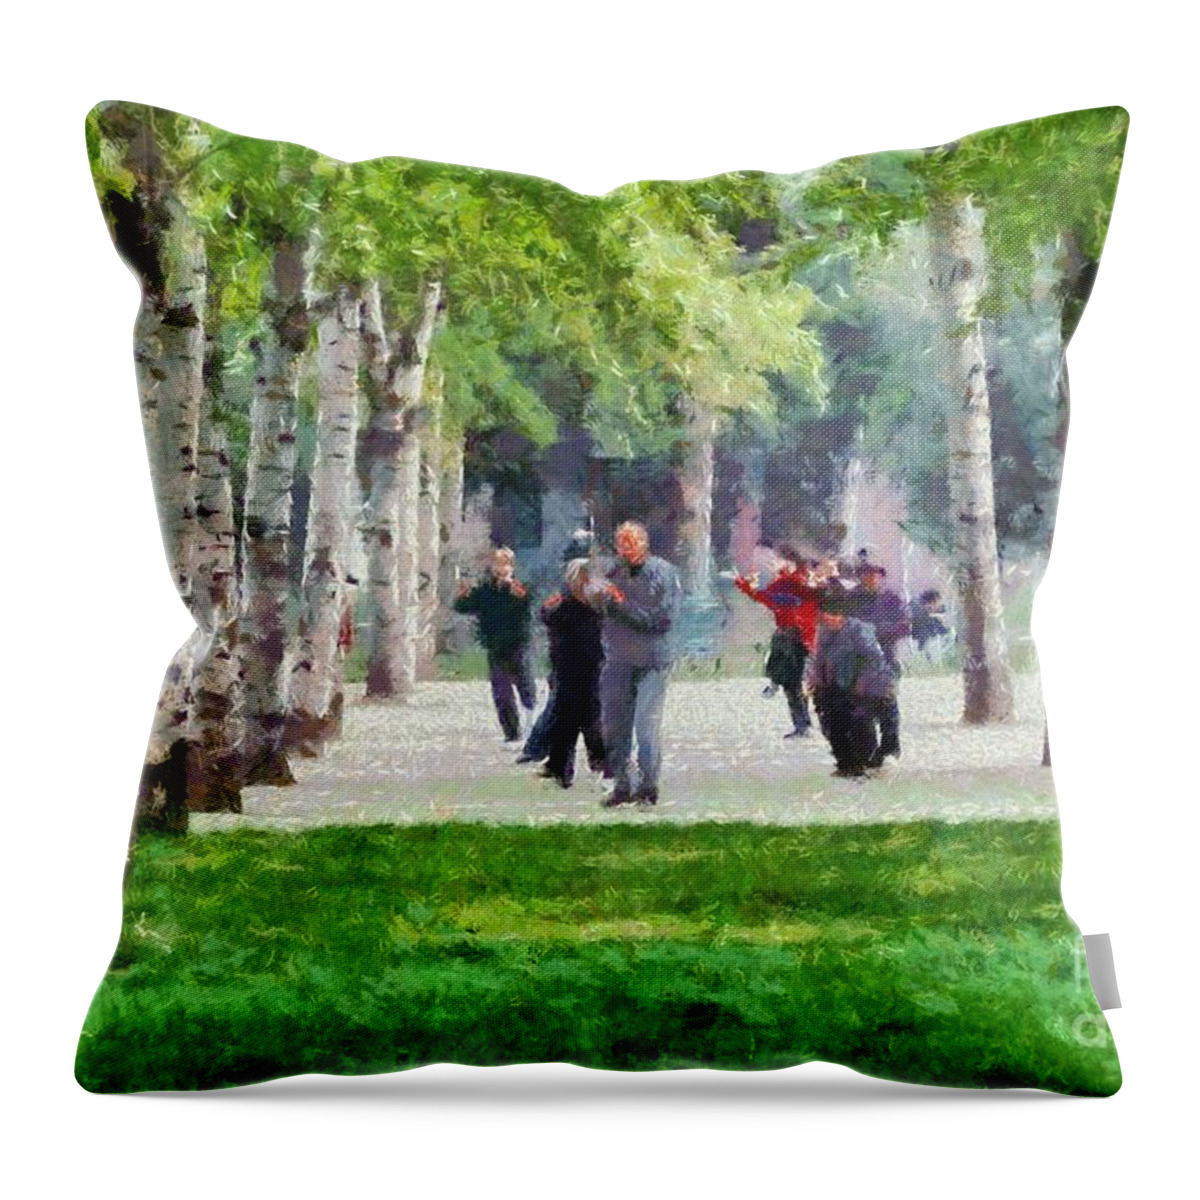 Paint; Painting; Paintings; Beijing; China; Asia; City; People; Temple Of Heaven; Park; Trees; Tiantan; Martial; Arts; Practice; Practicing; Train; Training; Morning; Capital; Chinese; East; Eastern; Holidays; Vacation; Travel; Trip; Voyage; Journey; Tourism; Touristic Throw Pillow featuring the painting Practicing martial arts by George Atsametakis